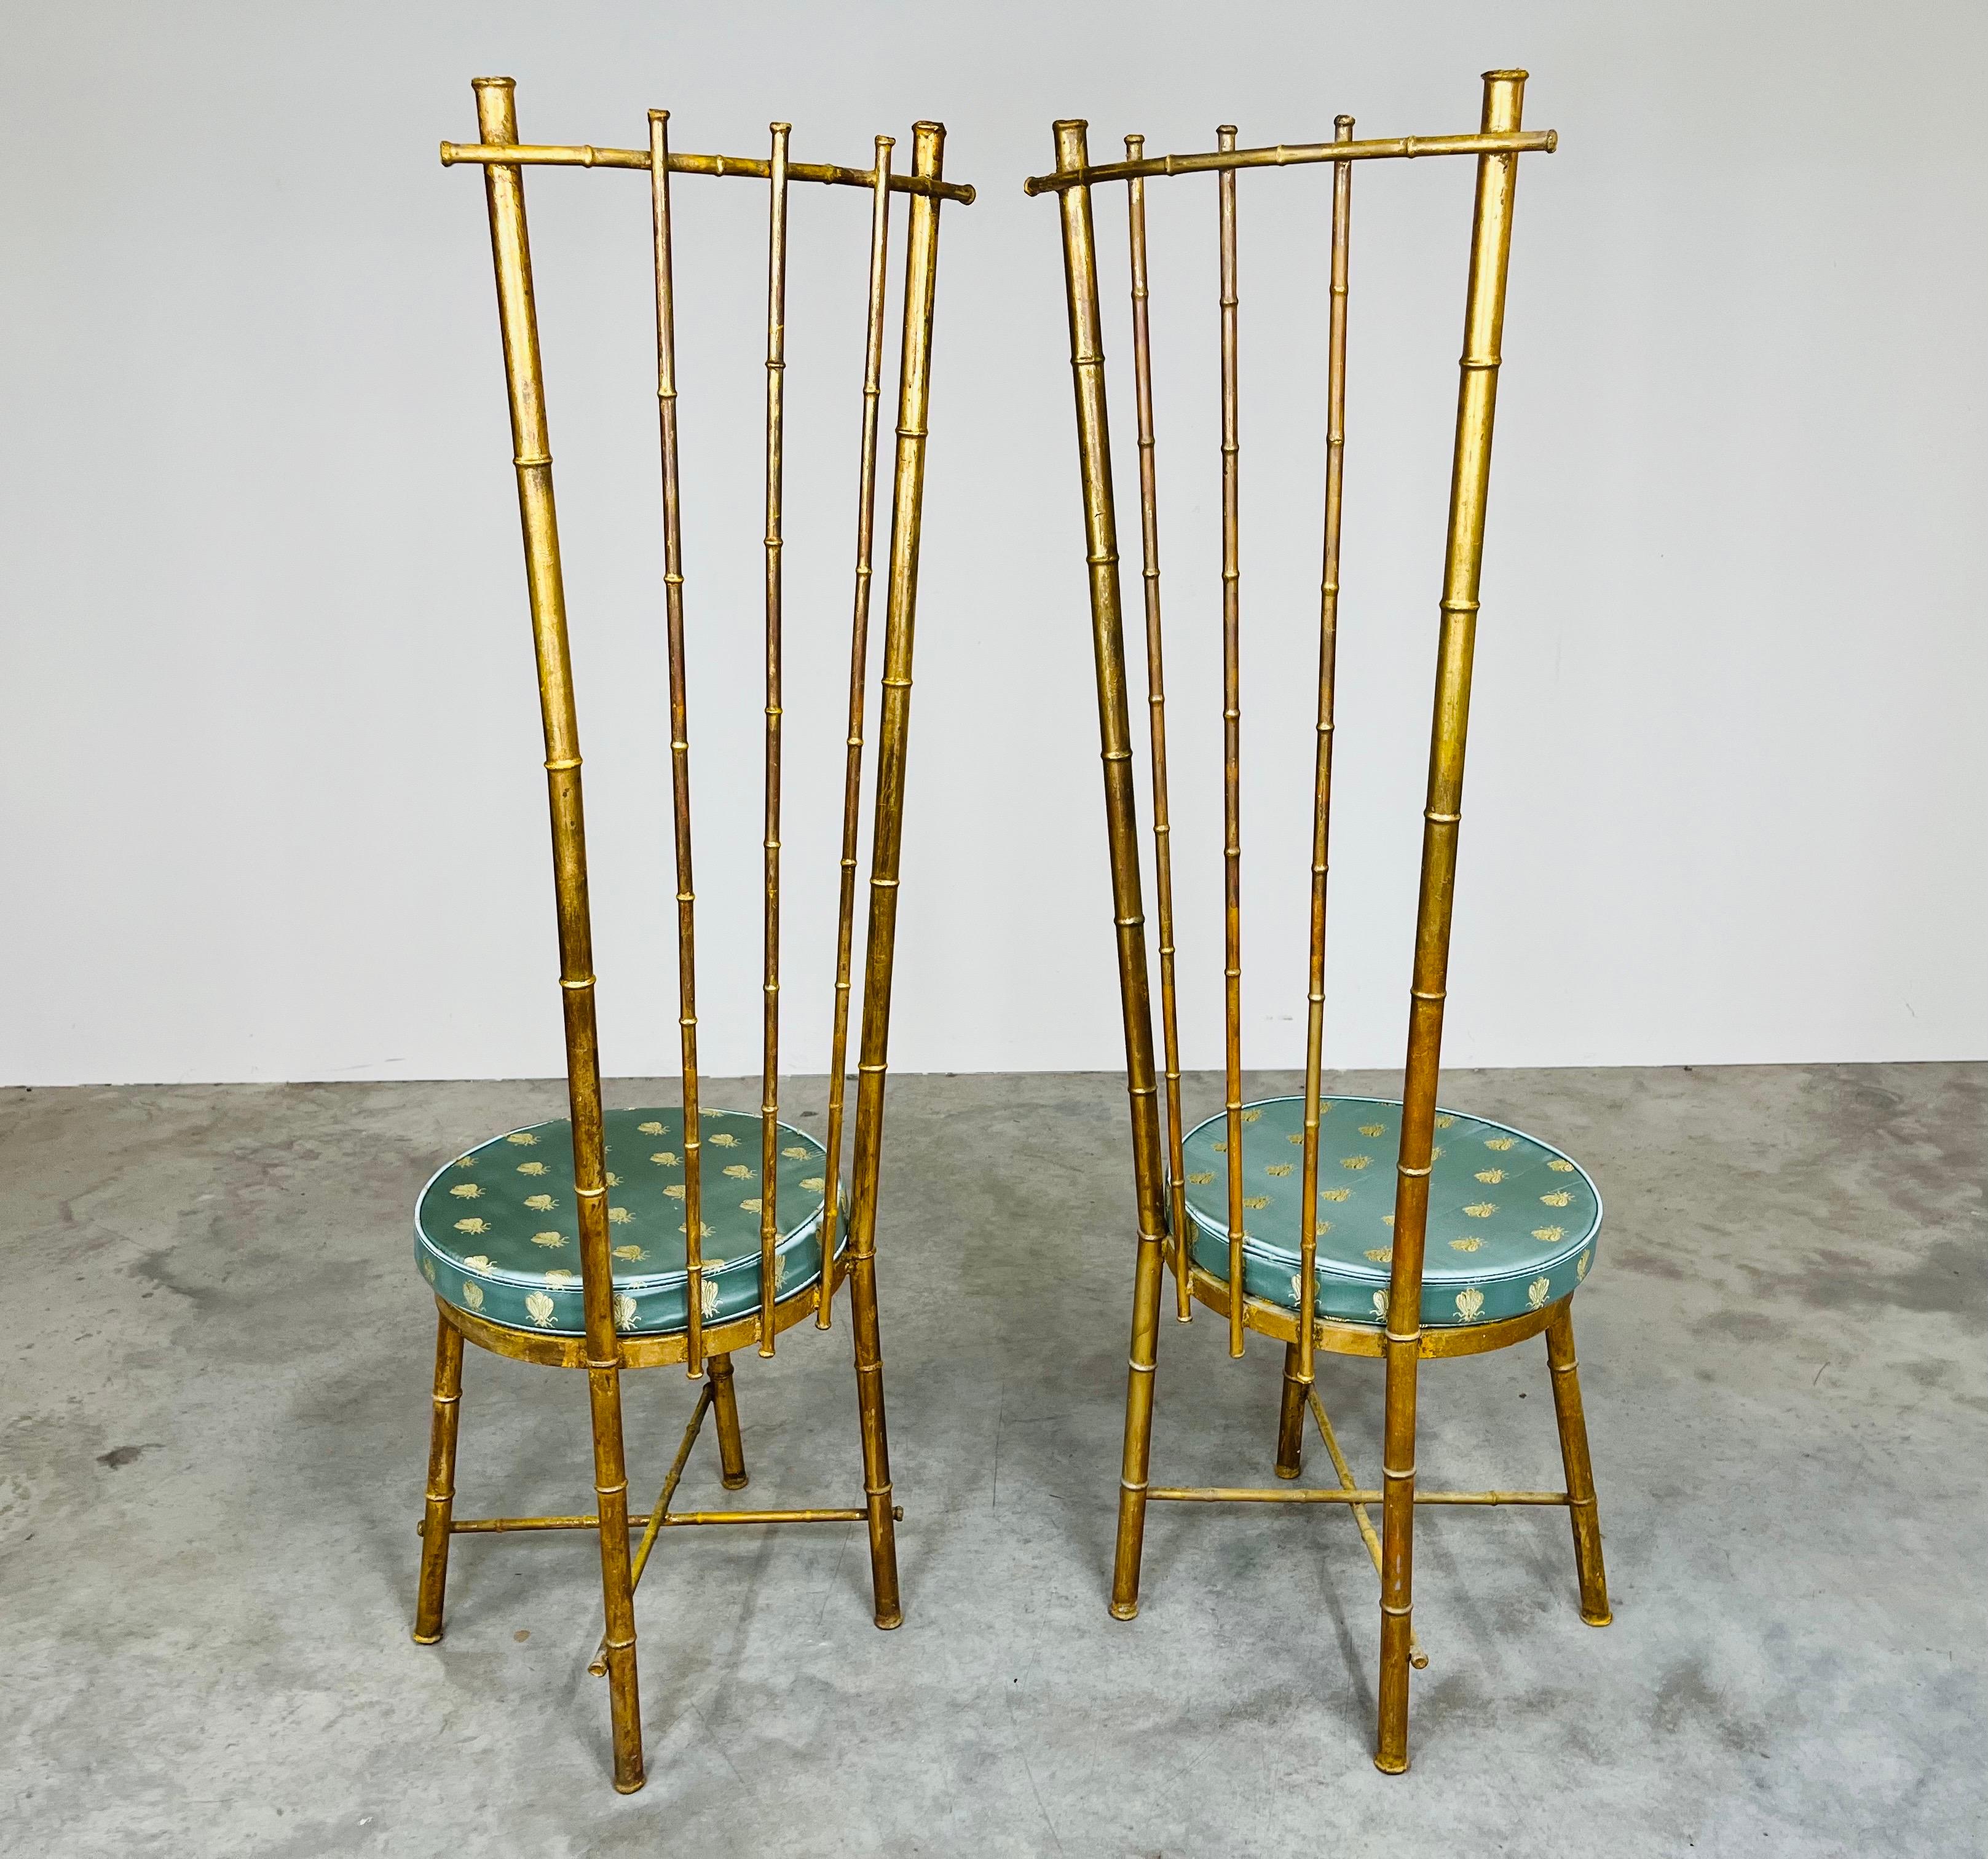 Vintage Pair Of Hollywood Regency Gold Gilt Metal Faux Bamboo High Back Chairs For Sale 3